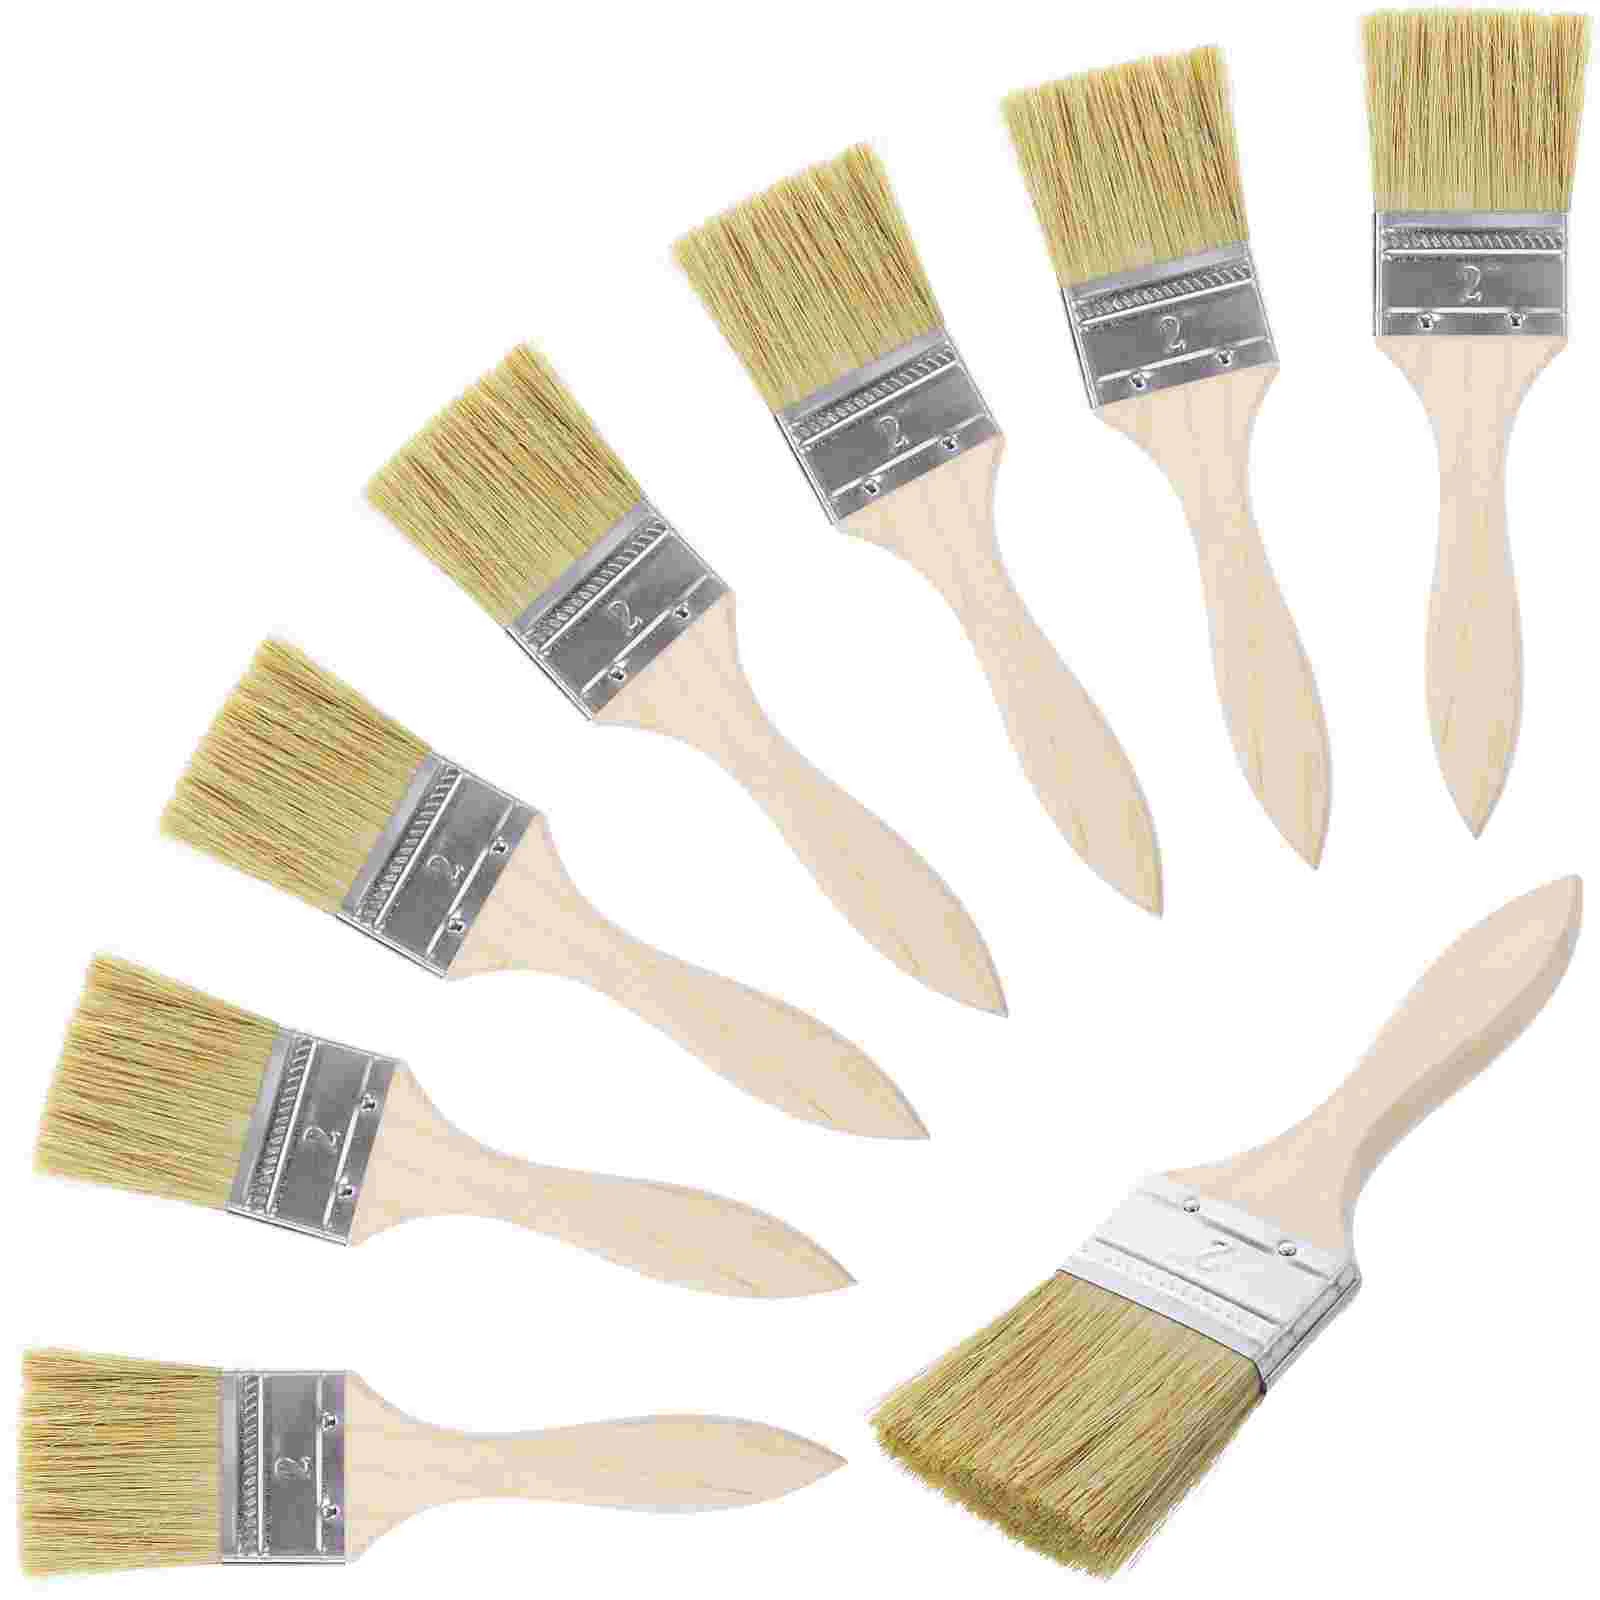 

Brushes, 23pcs Wooden Handle Painting Tool Brush for Furniture Wall Home Painting